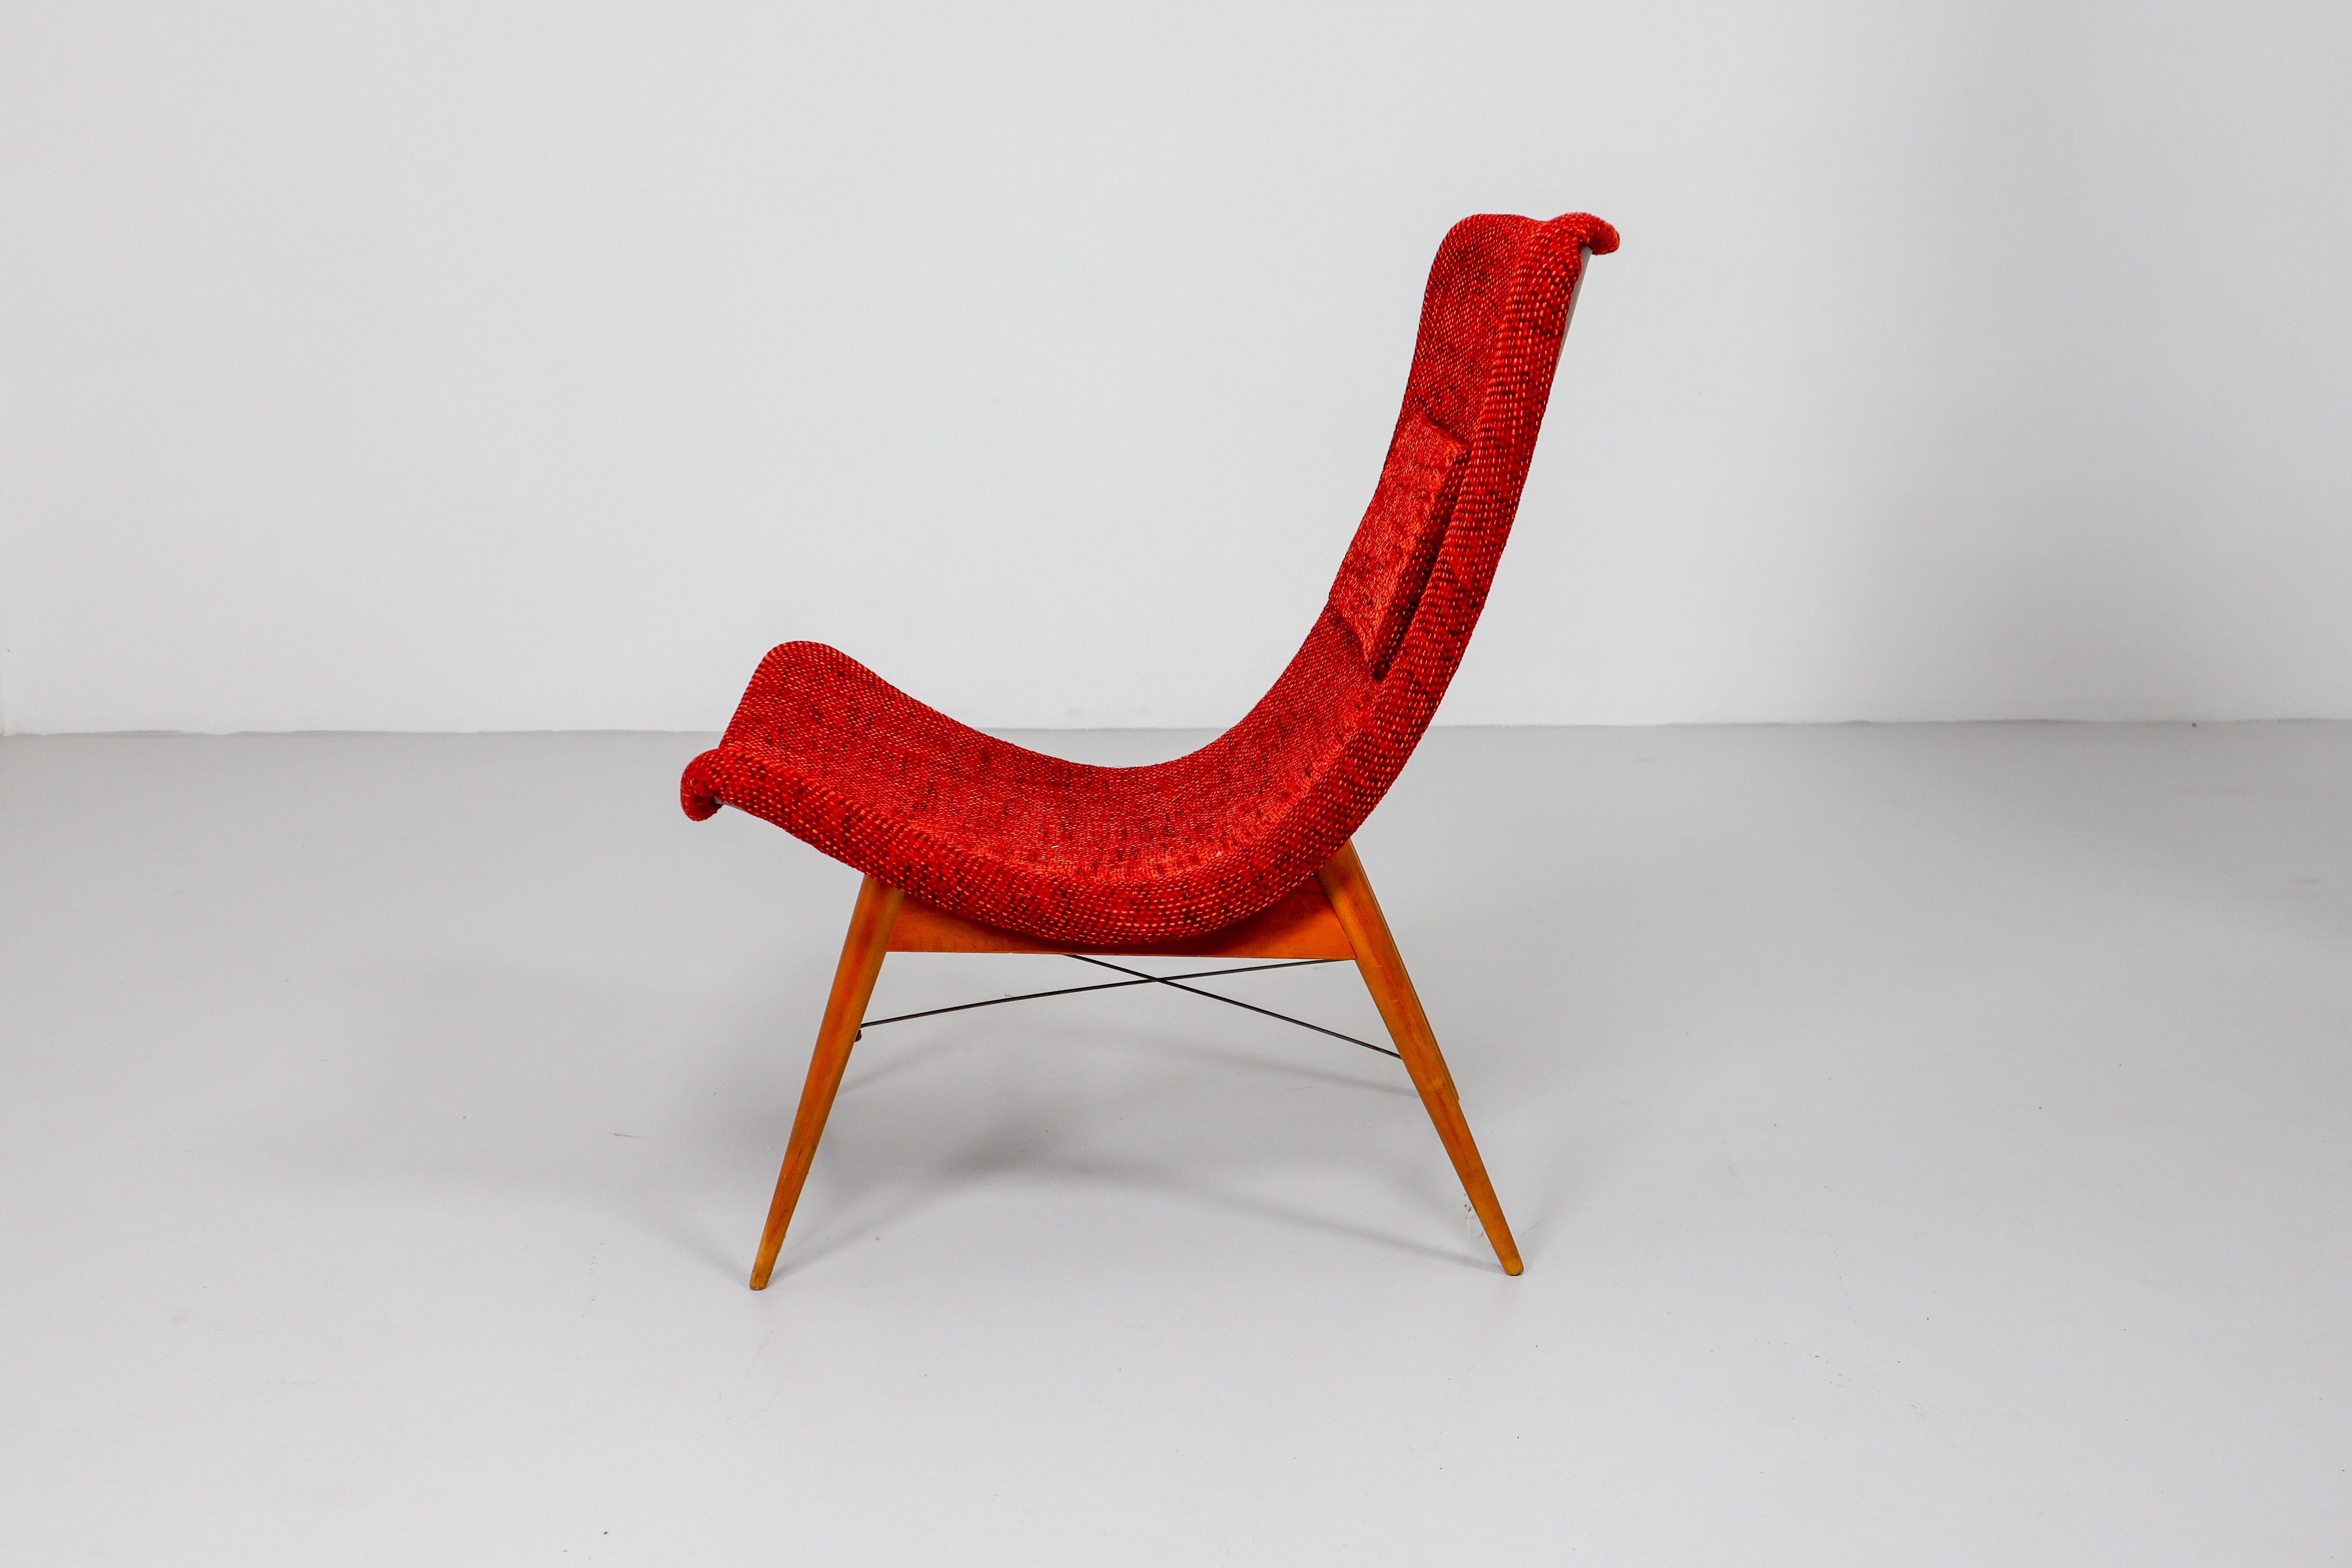 Lounge chairs by Miroslav Navratil, manufactured in former Czechoslovakia by Cesky Nabytek, 1959. Original wooden base, fiberglass shell seating. The backside of the chair is original black color and have a new Reupholstered fabric in strawberry red